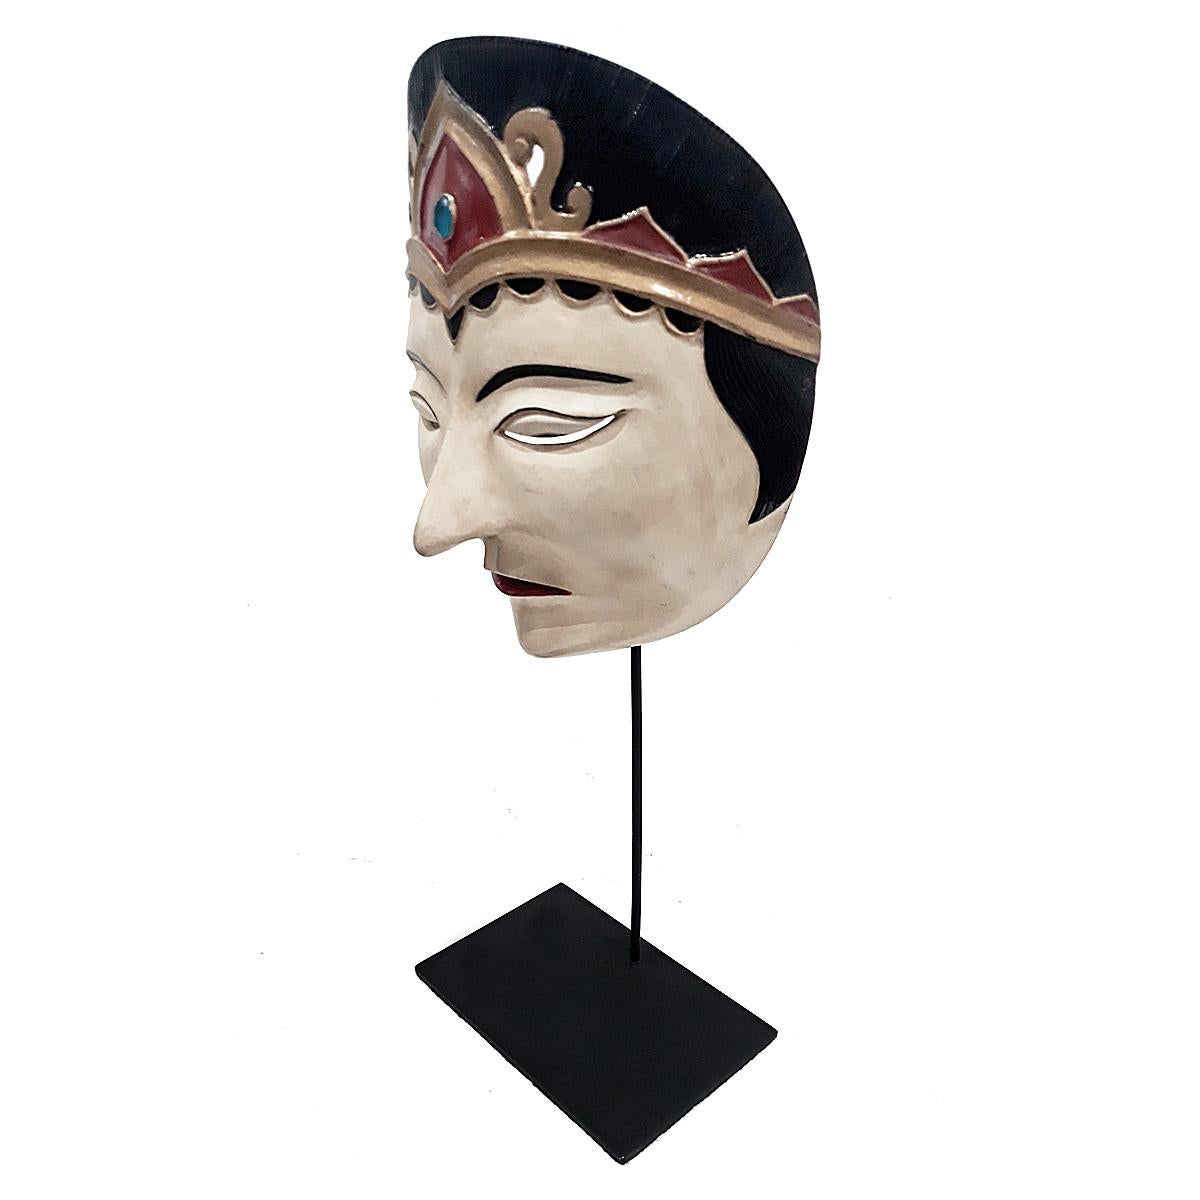 A vintage theater mask from Bali, Indonesia, circa 1975-1980. 
Polychromed hand-carved teak, mounted on a black metal stand.

This type of mask is used at Indonesian Topeng or Mask theater dances, where traditional stories of nobles, kings,